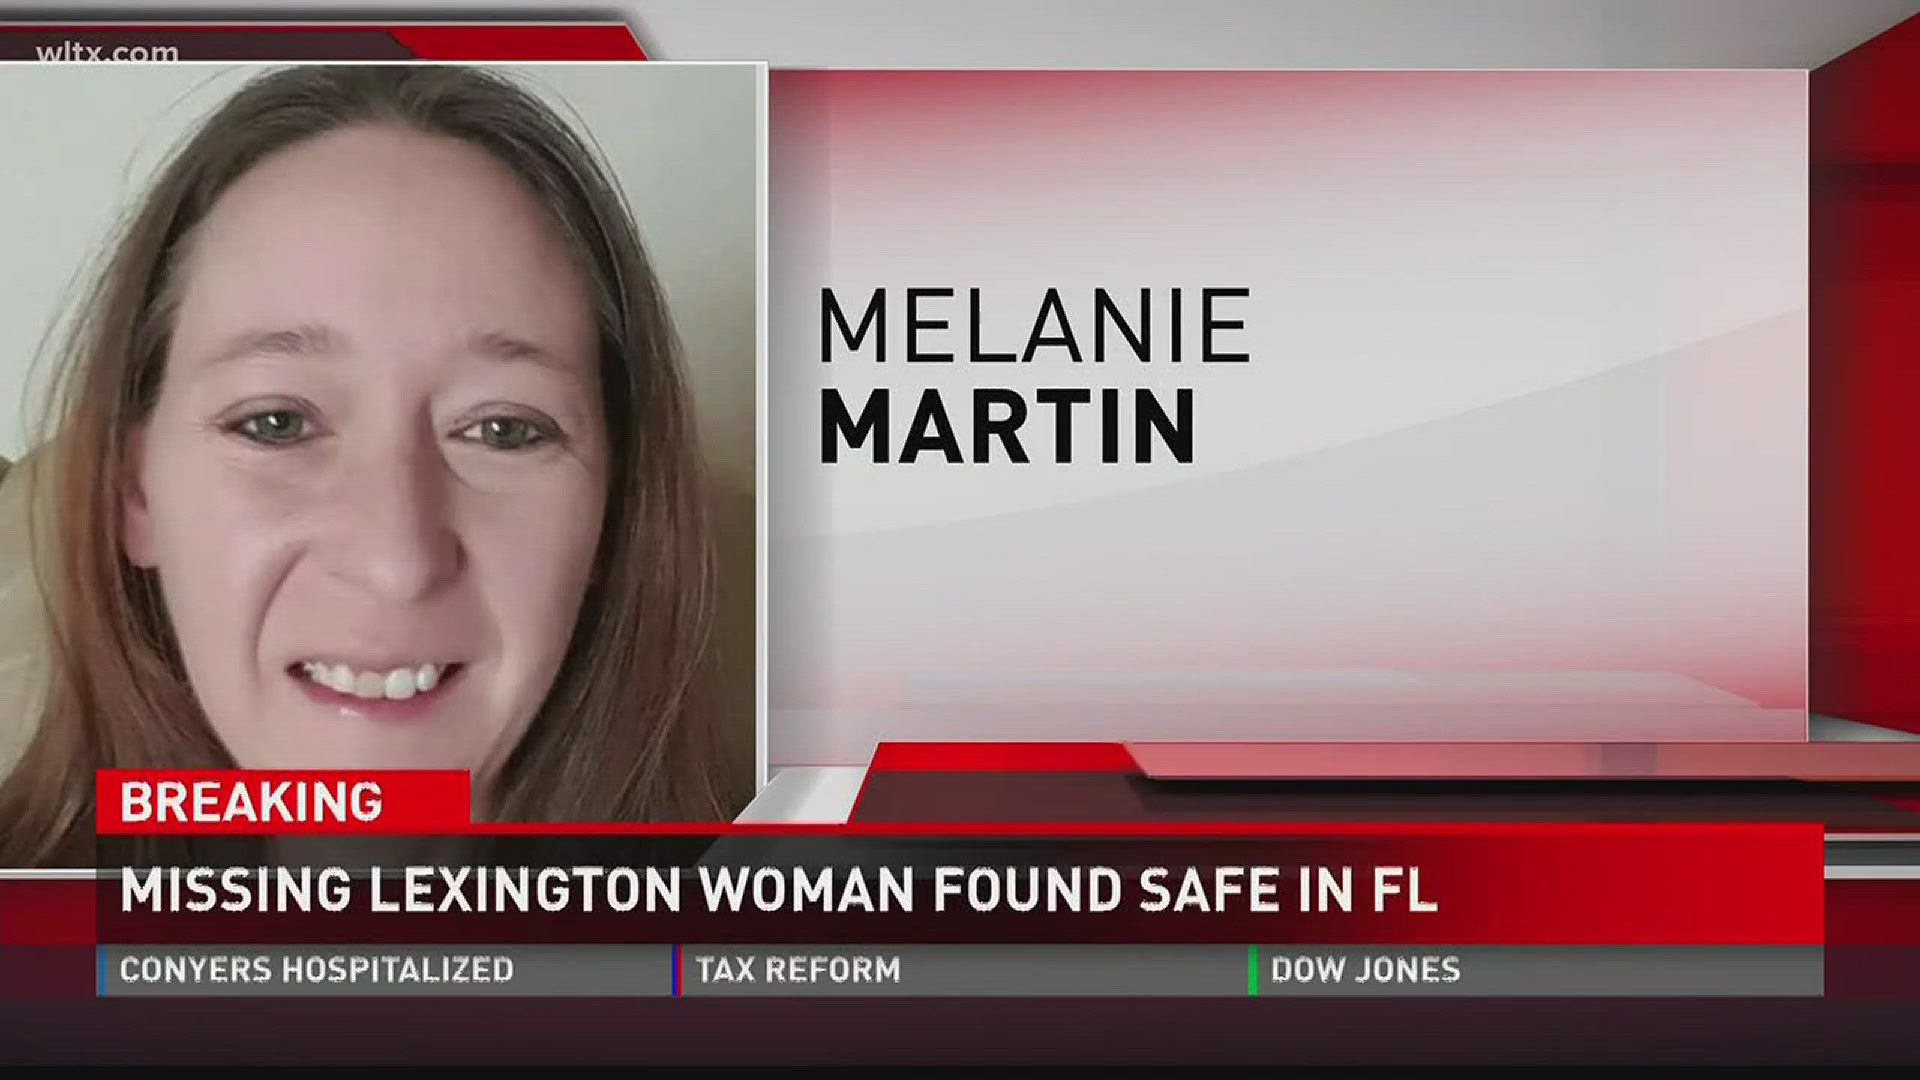 Melanie Price Martin has been located in Florida, according to the Lexington Sheriff's Department.